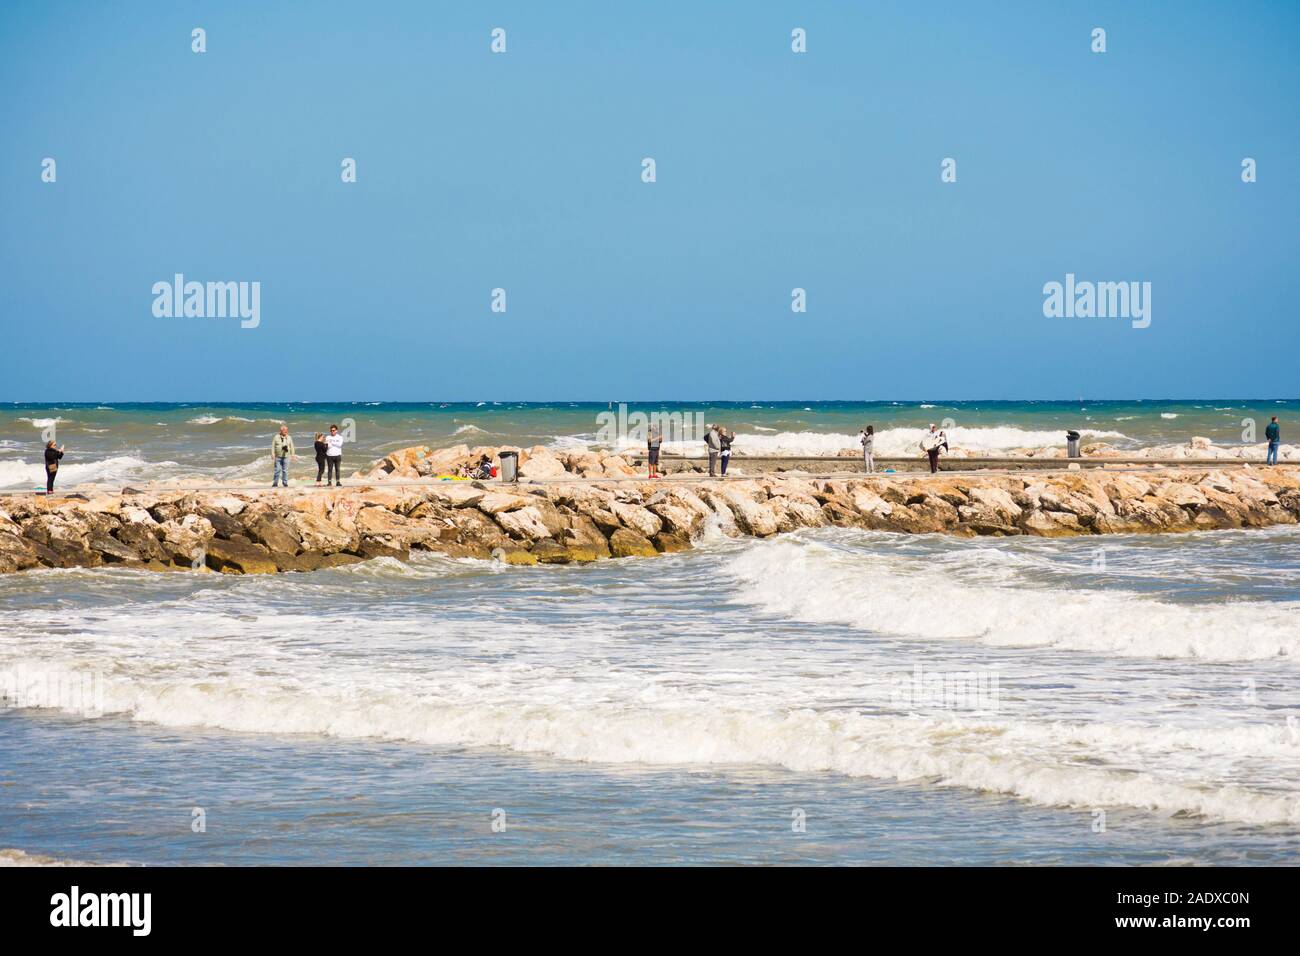 People watch high waves tide and wind on pier, Fuengirola, Malaga, Andalusia. Spain Stock Photo